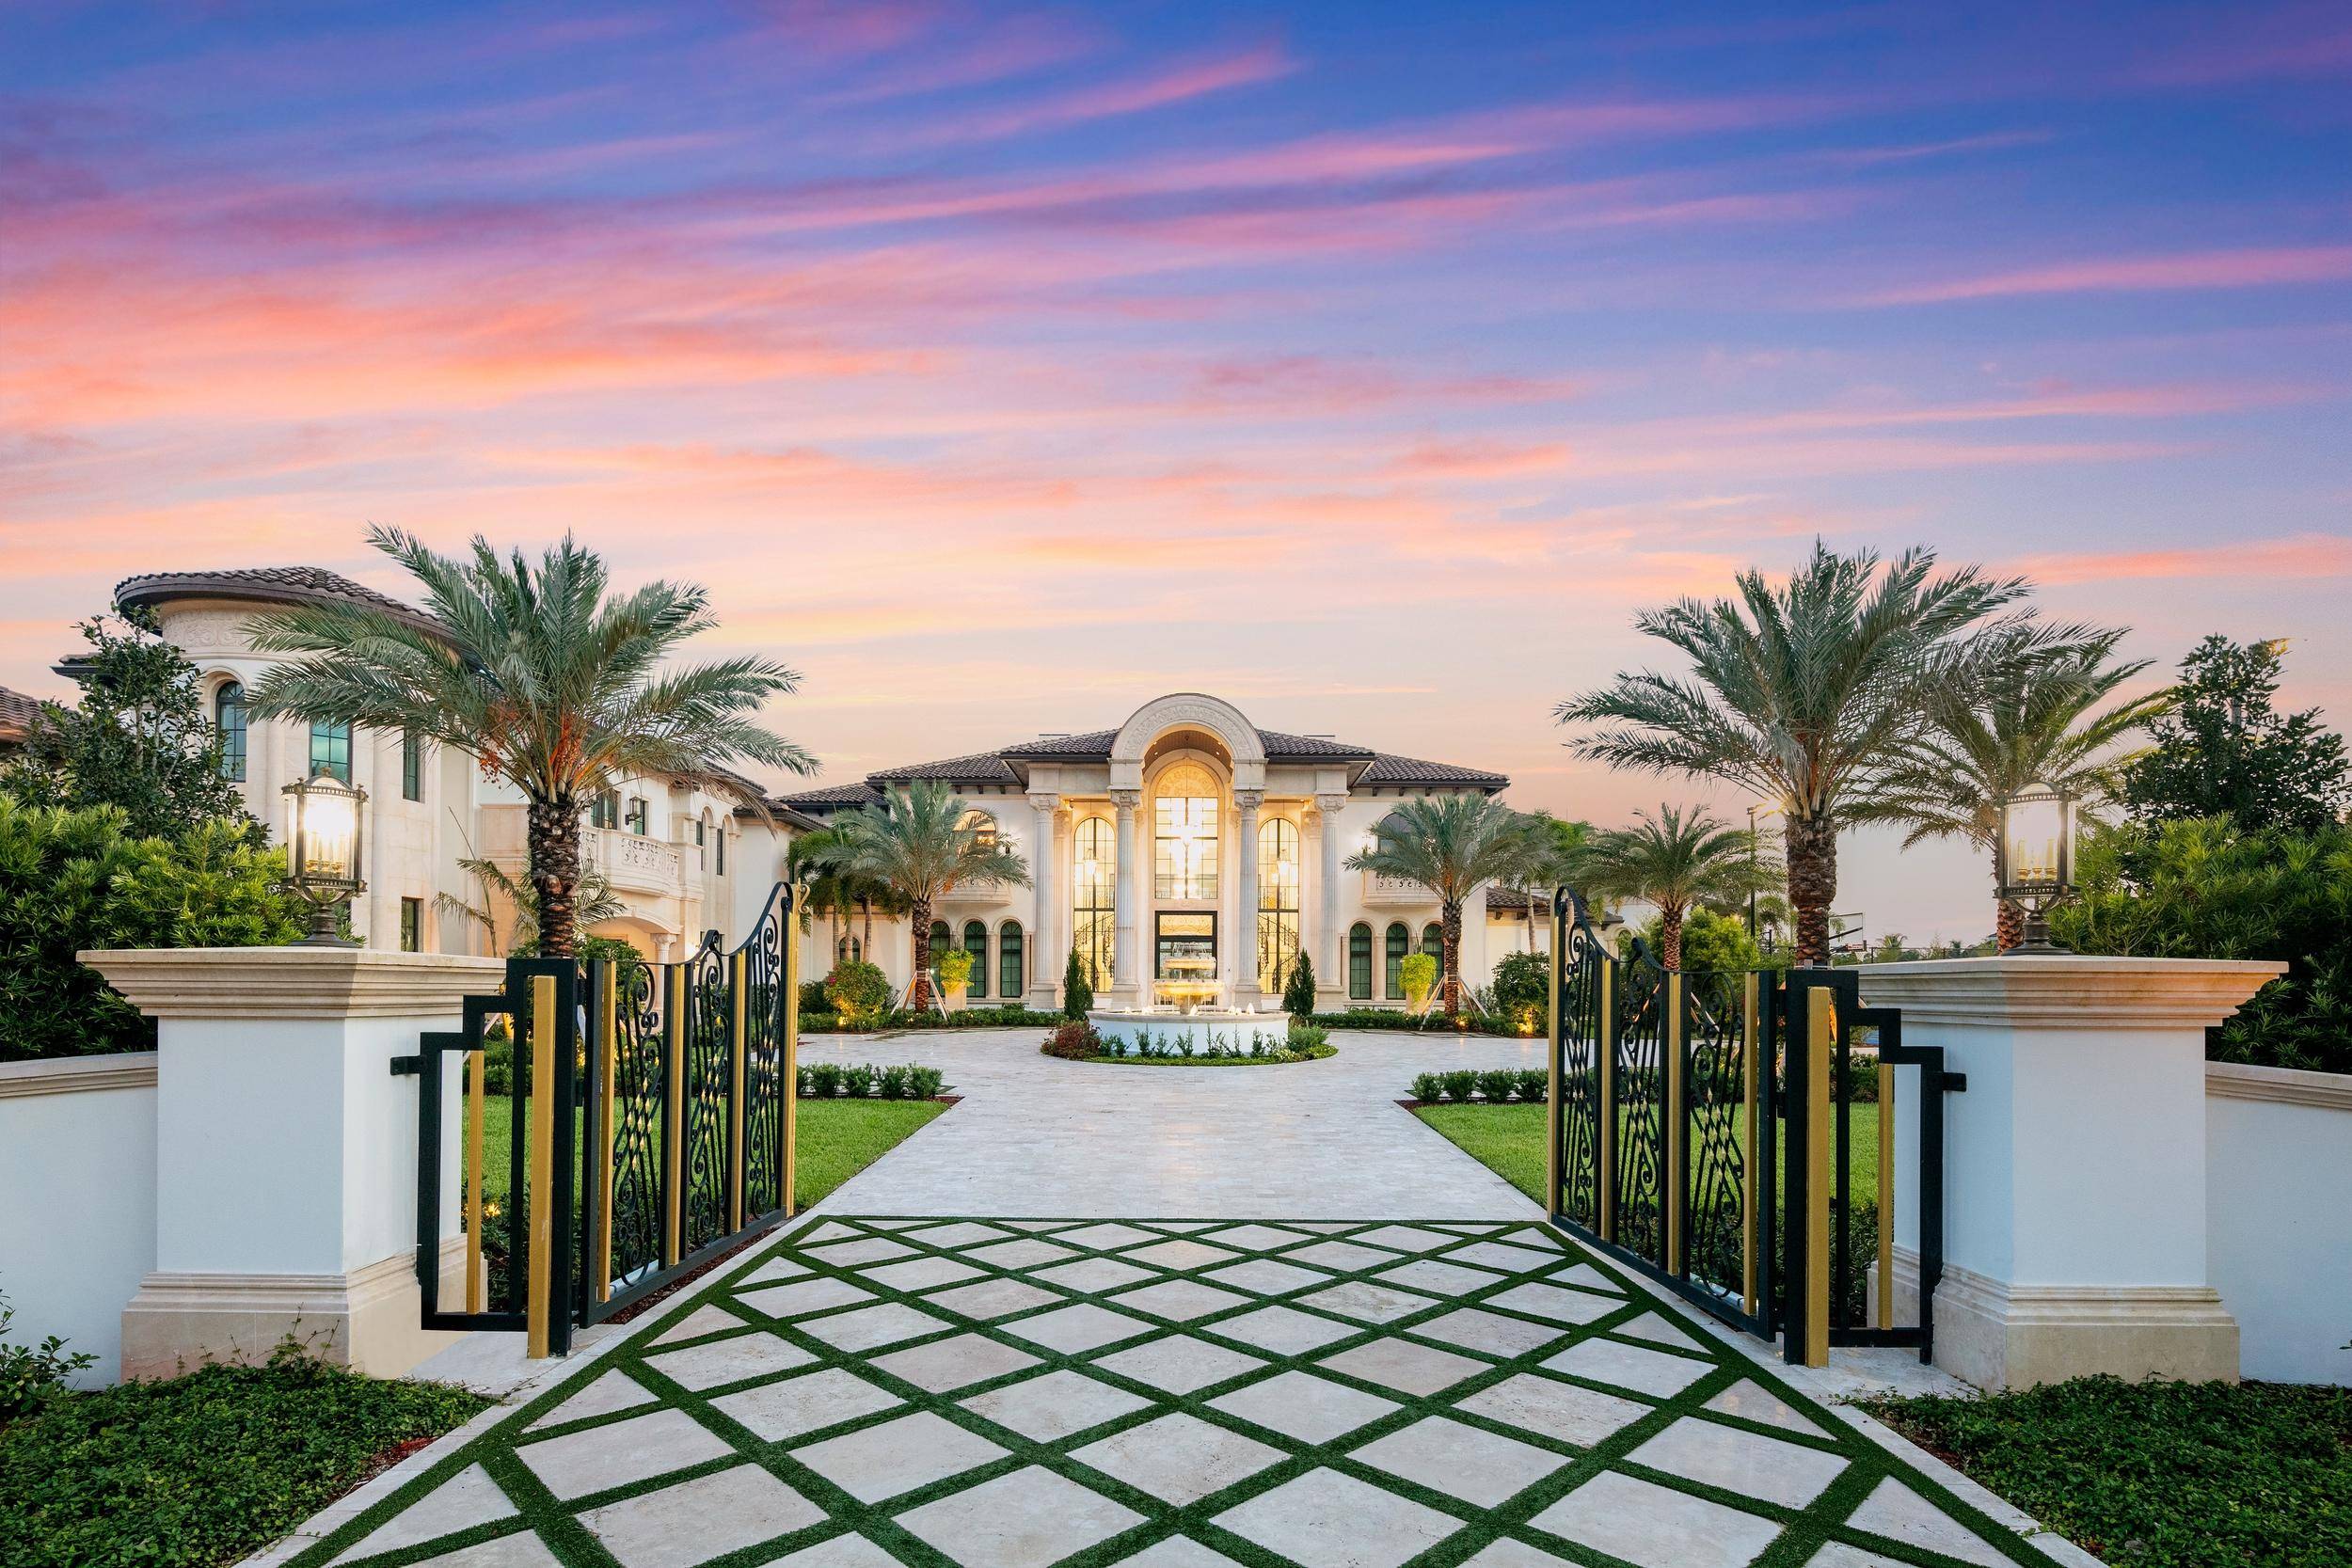 One of South Florida's most prestigious residential communities provides the exclusive setting for an expansive and brand new compound that astonishes at every turn.